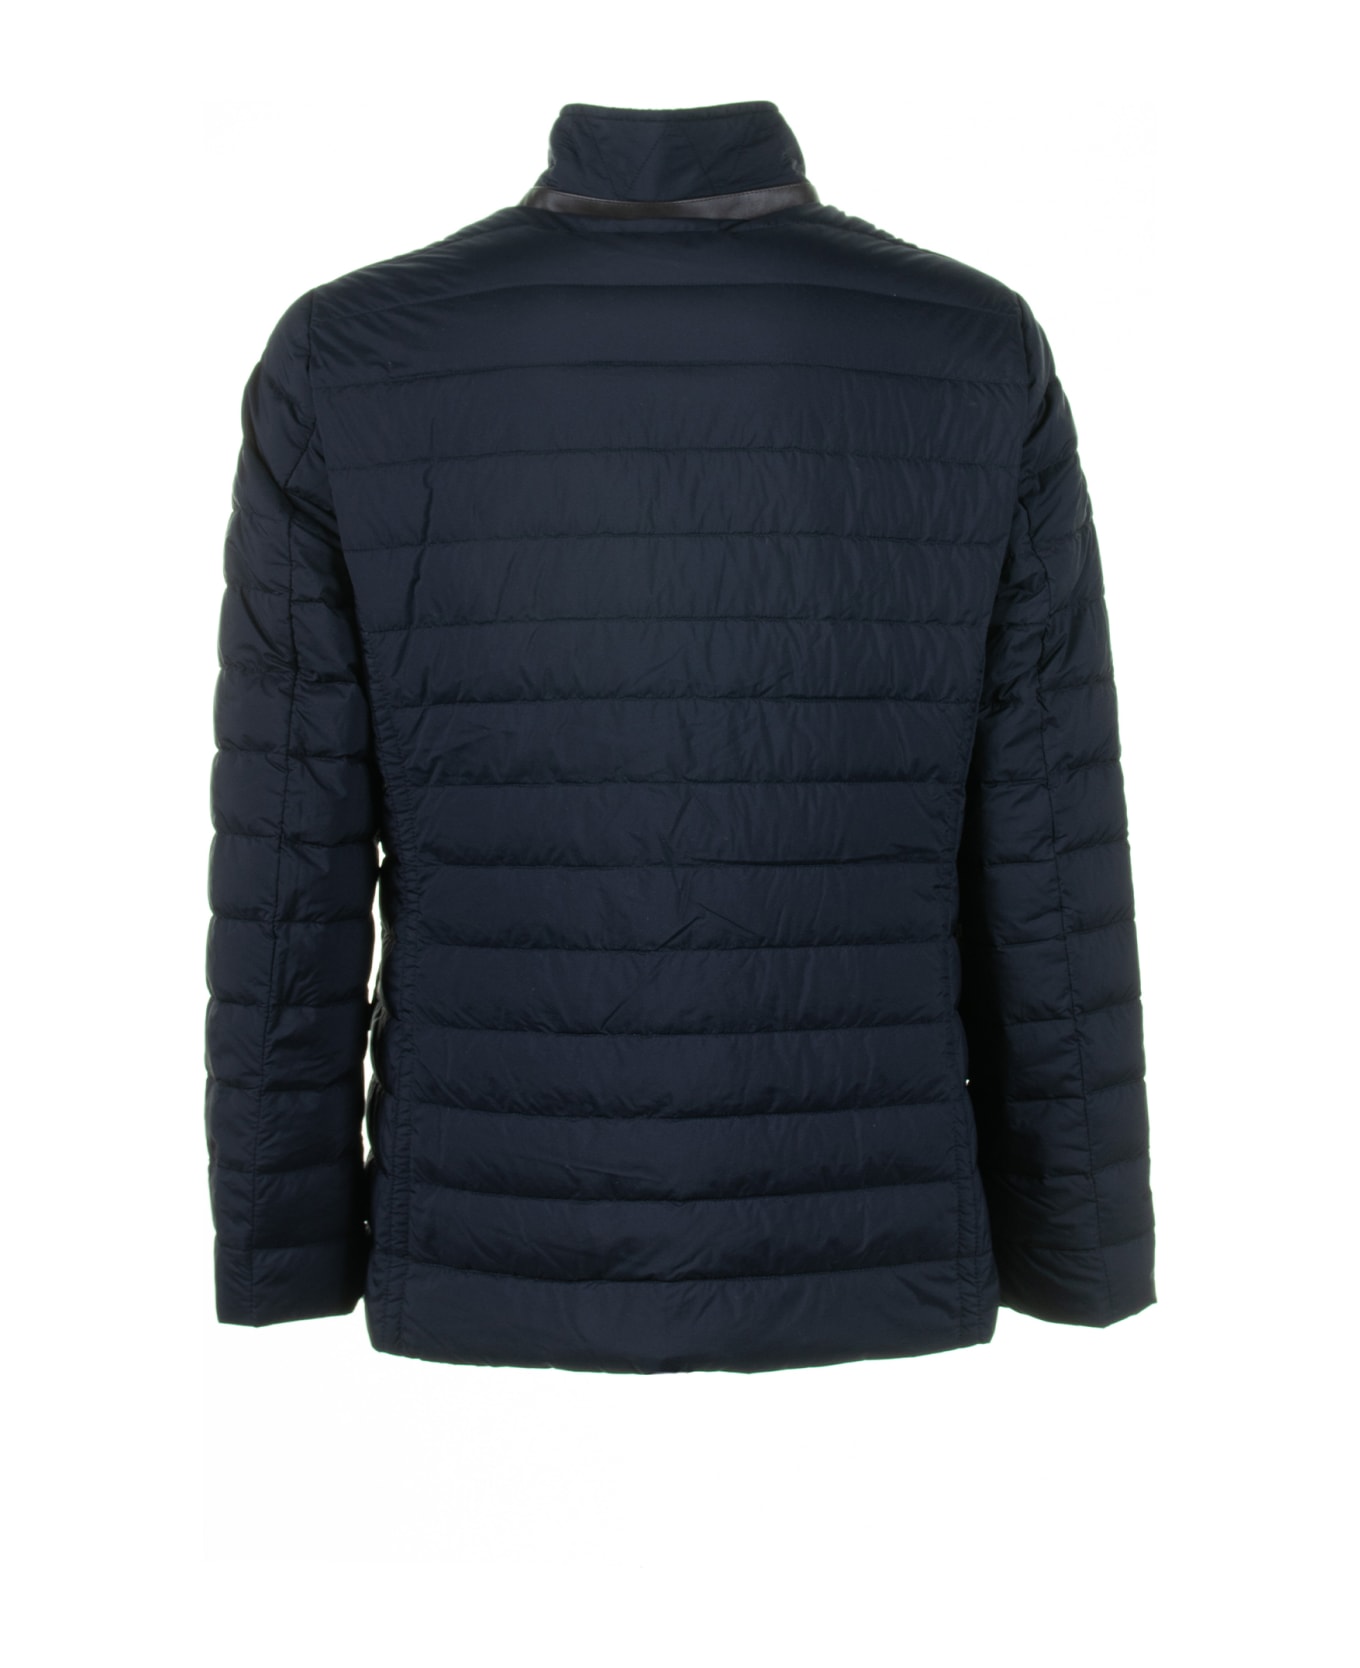 Moorer Blue Quilted Down Jacket With Buttons - DARK BLU